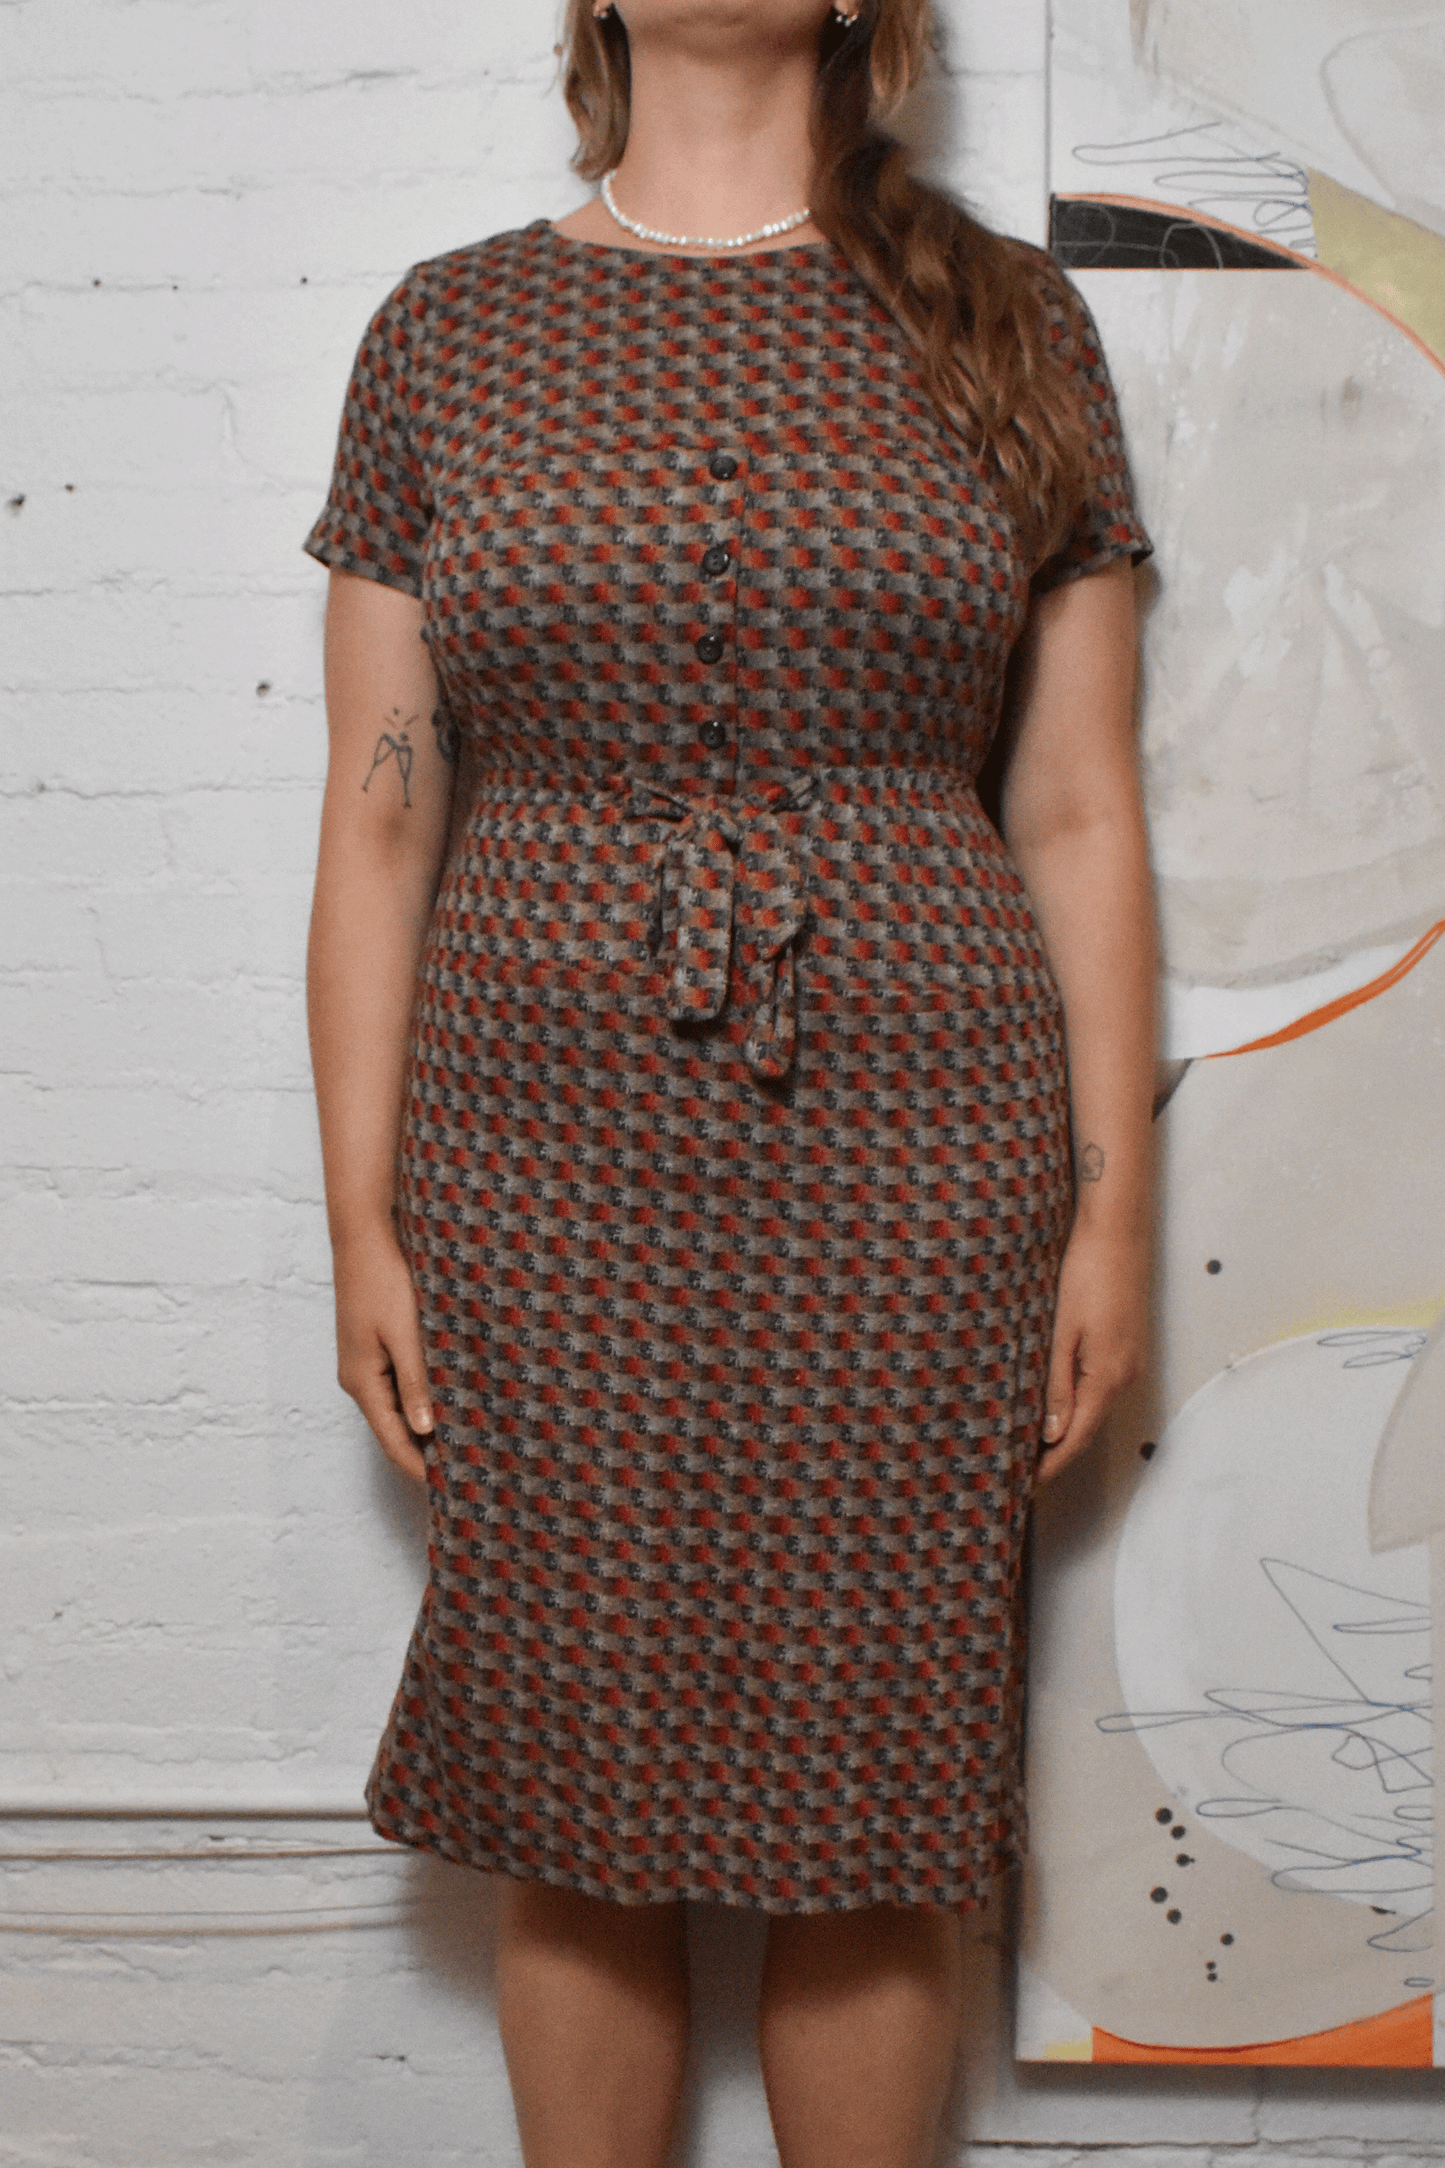 Vintage 1950s Knit Printed Shirt Dress With Bow